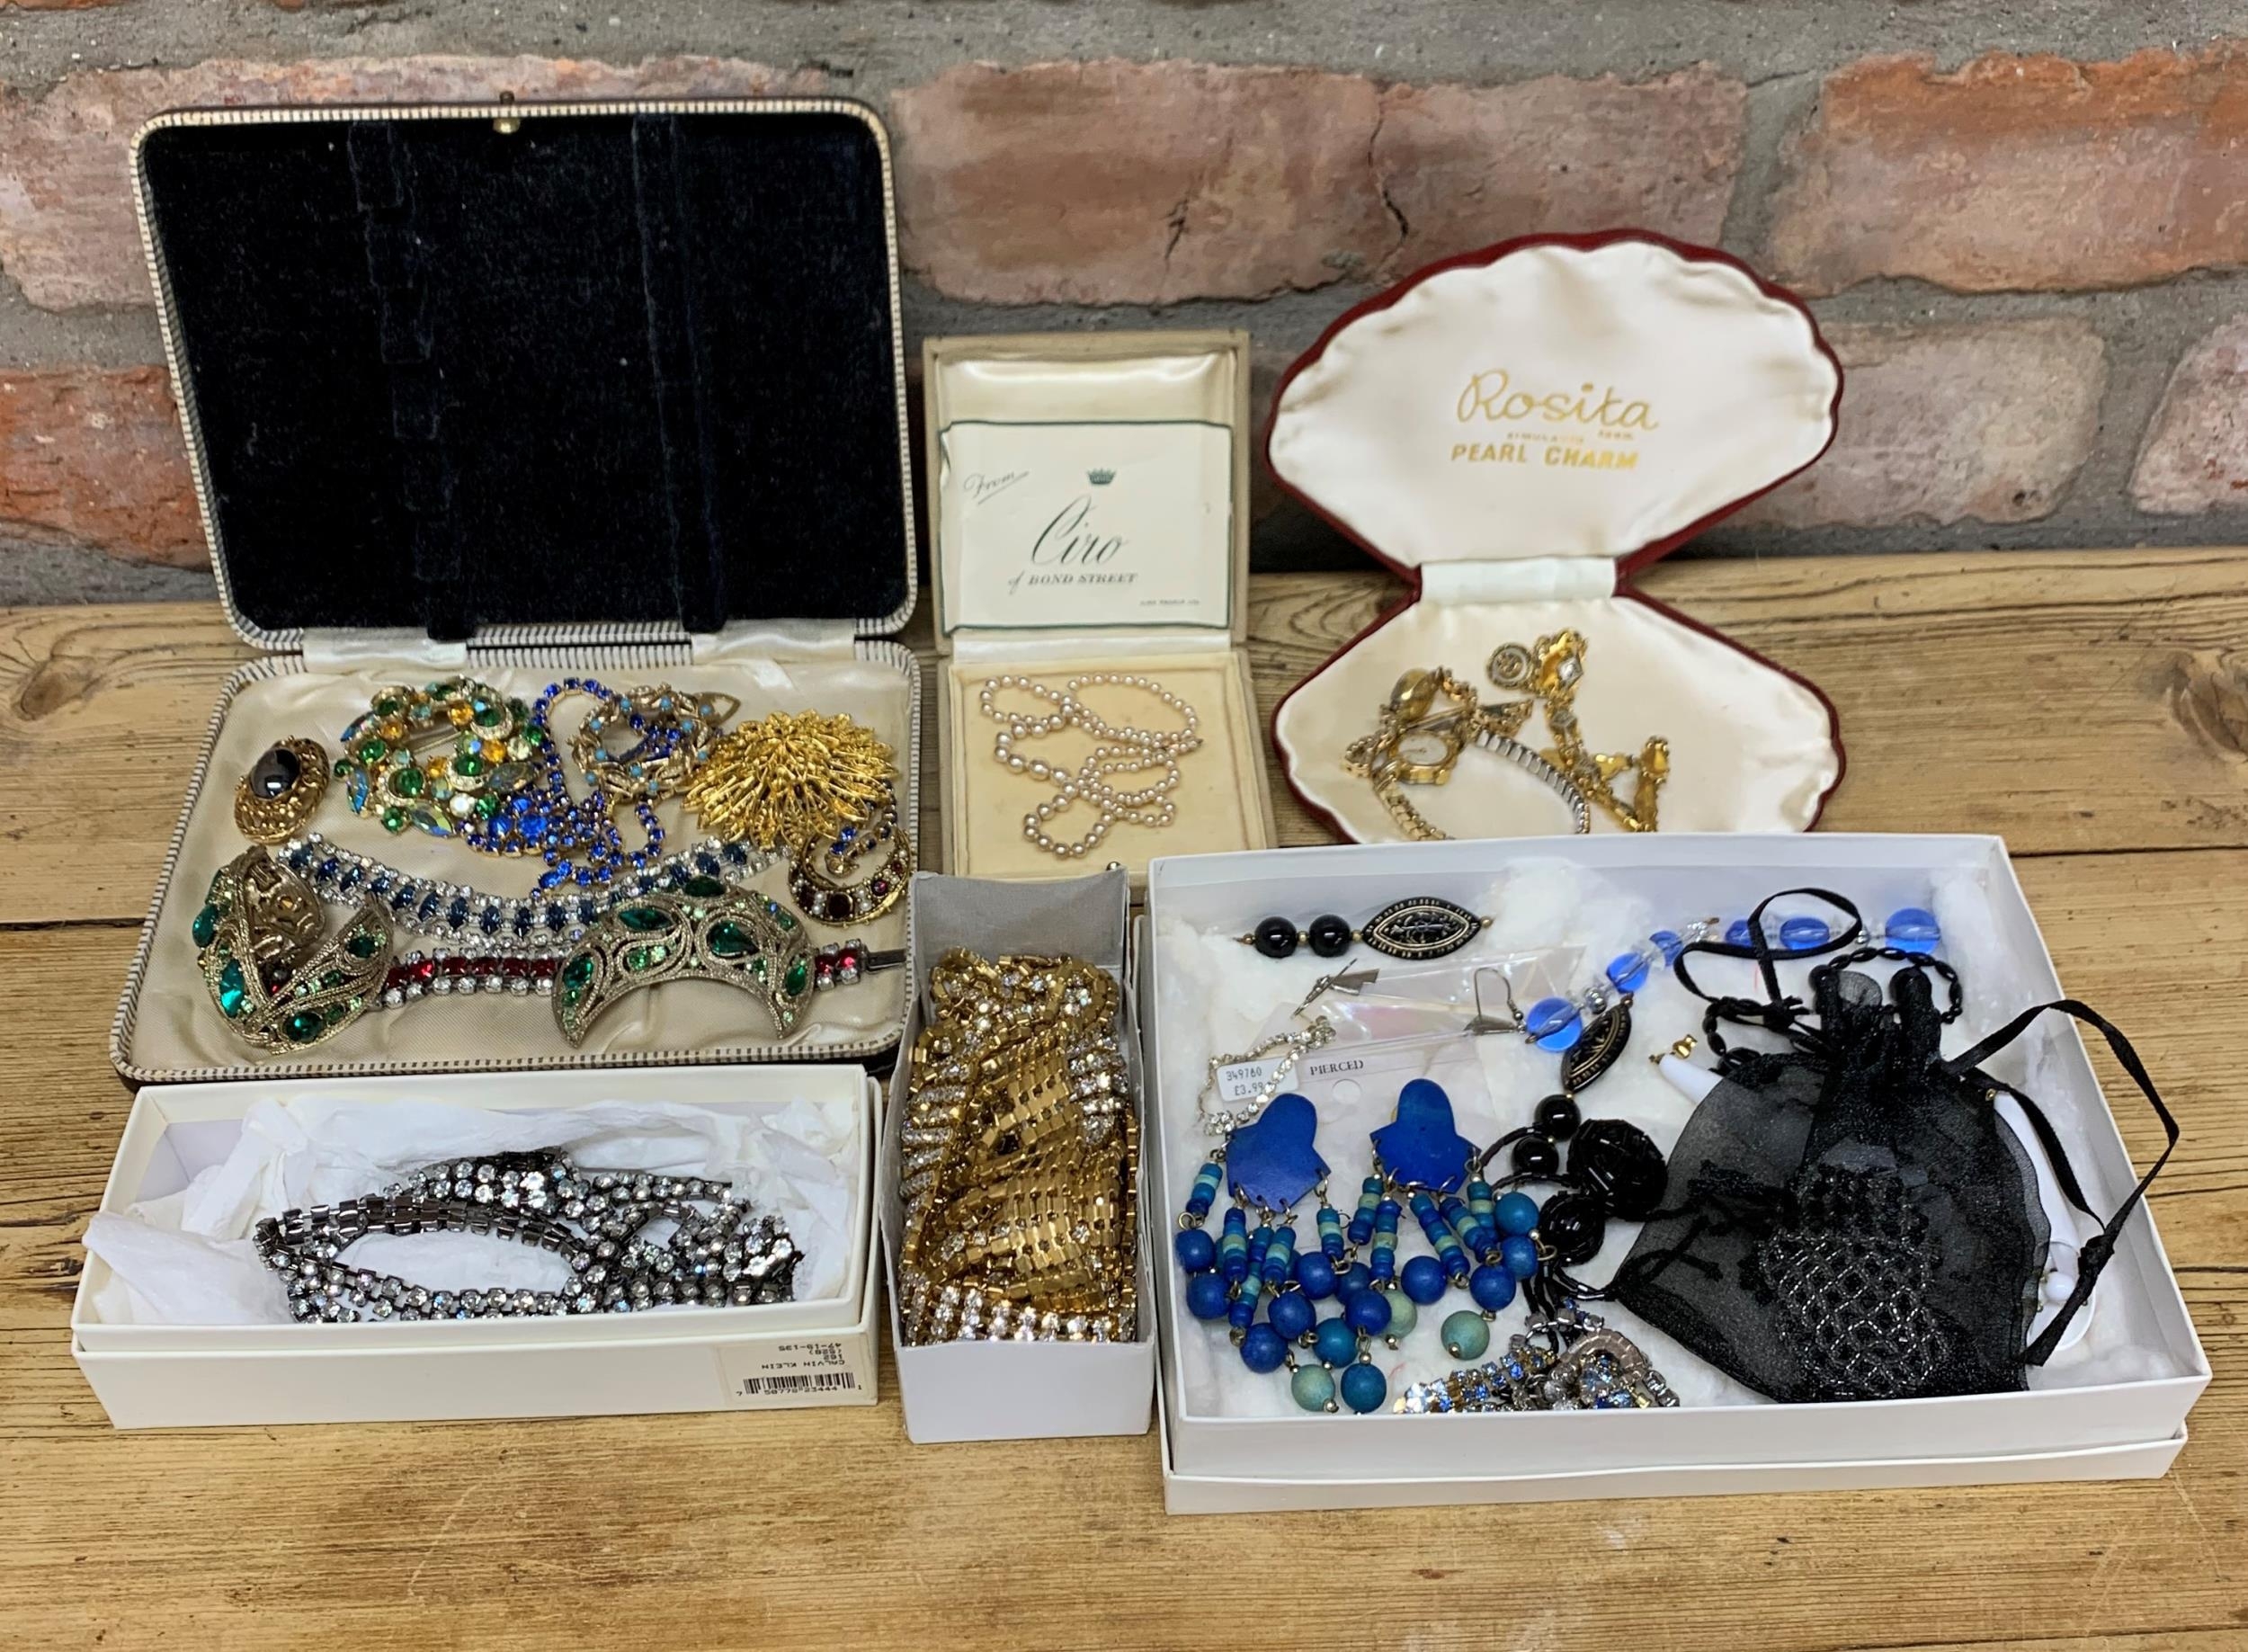 Assortment of mixed vintage costume jewellery and watches